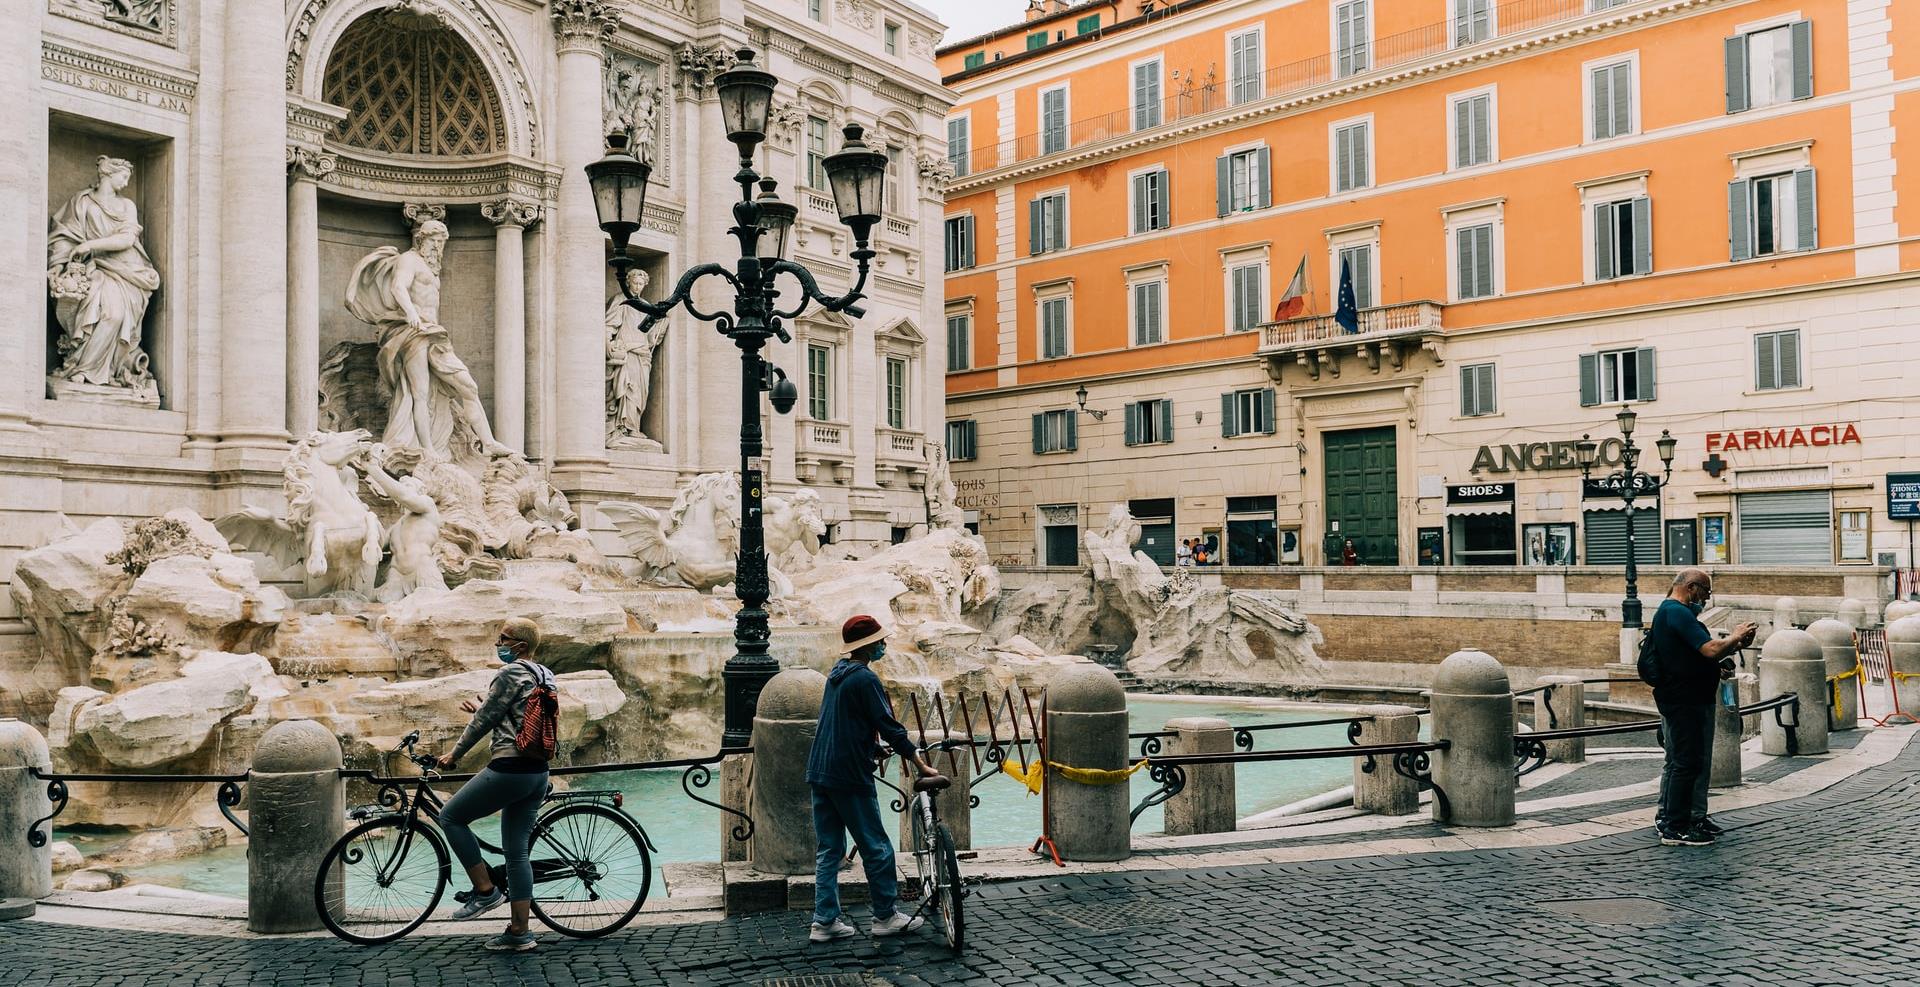 Join our free walking tours in Rome